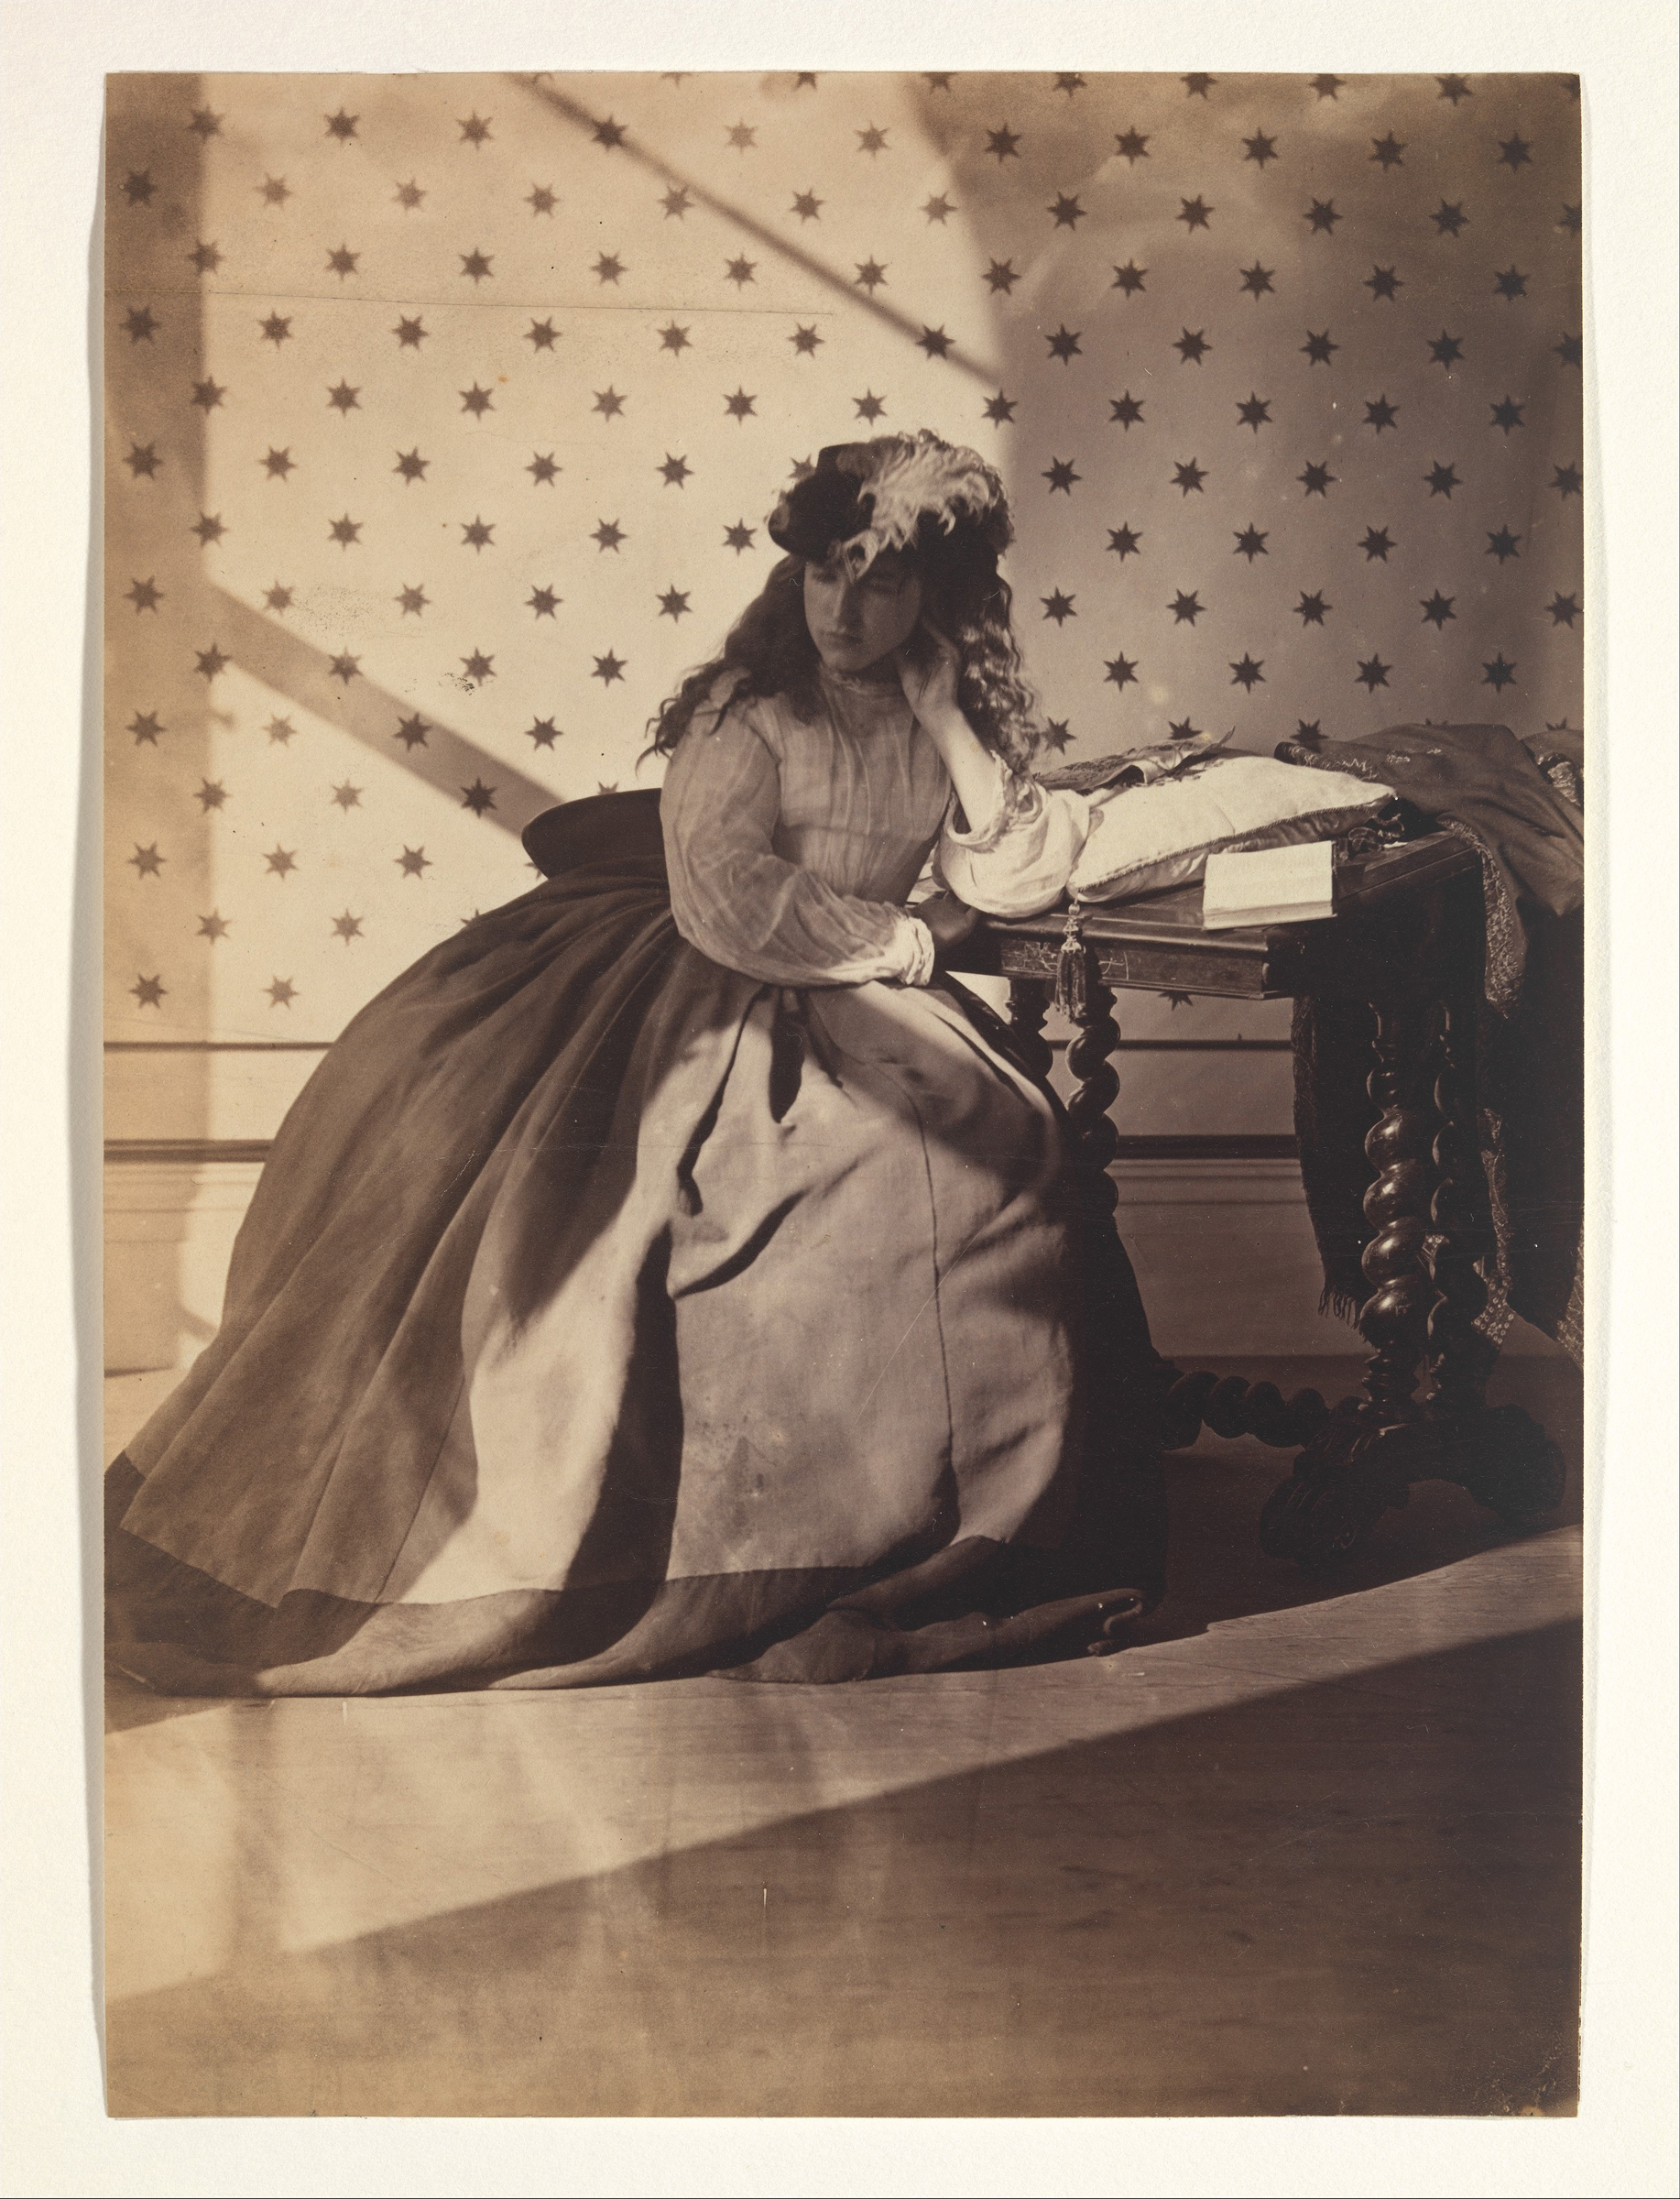 Photographic Study by Clementina Hawarden, another photographer featured in the show (National Portrait Gallery) 